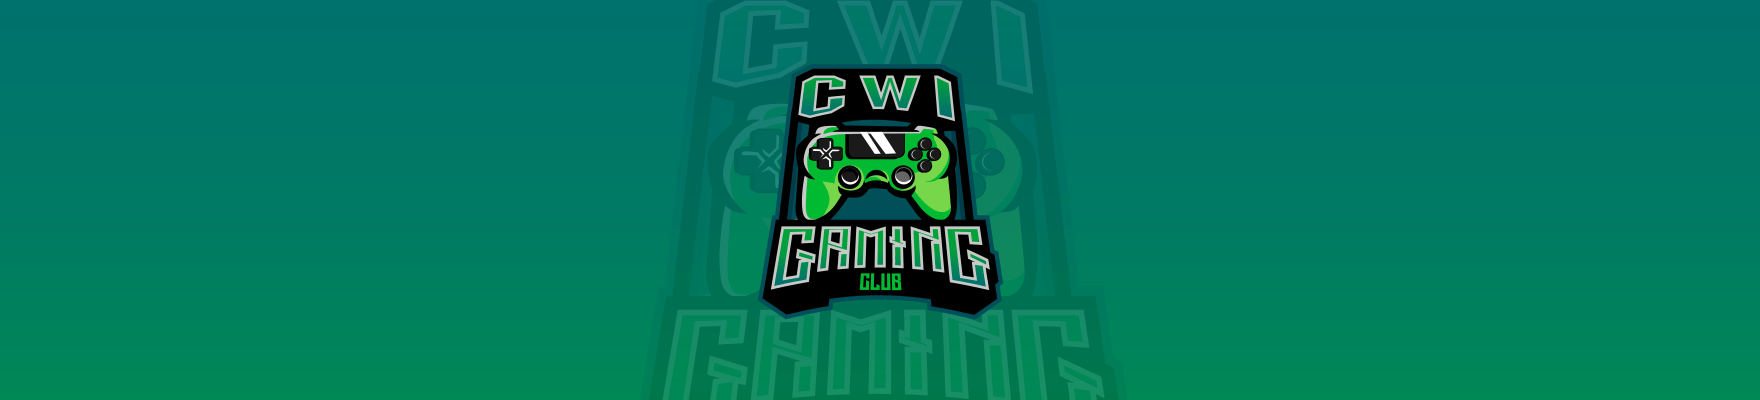 gaming club logo with green background